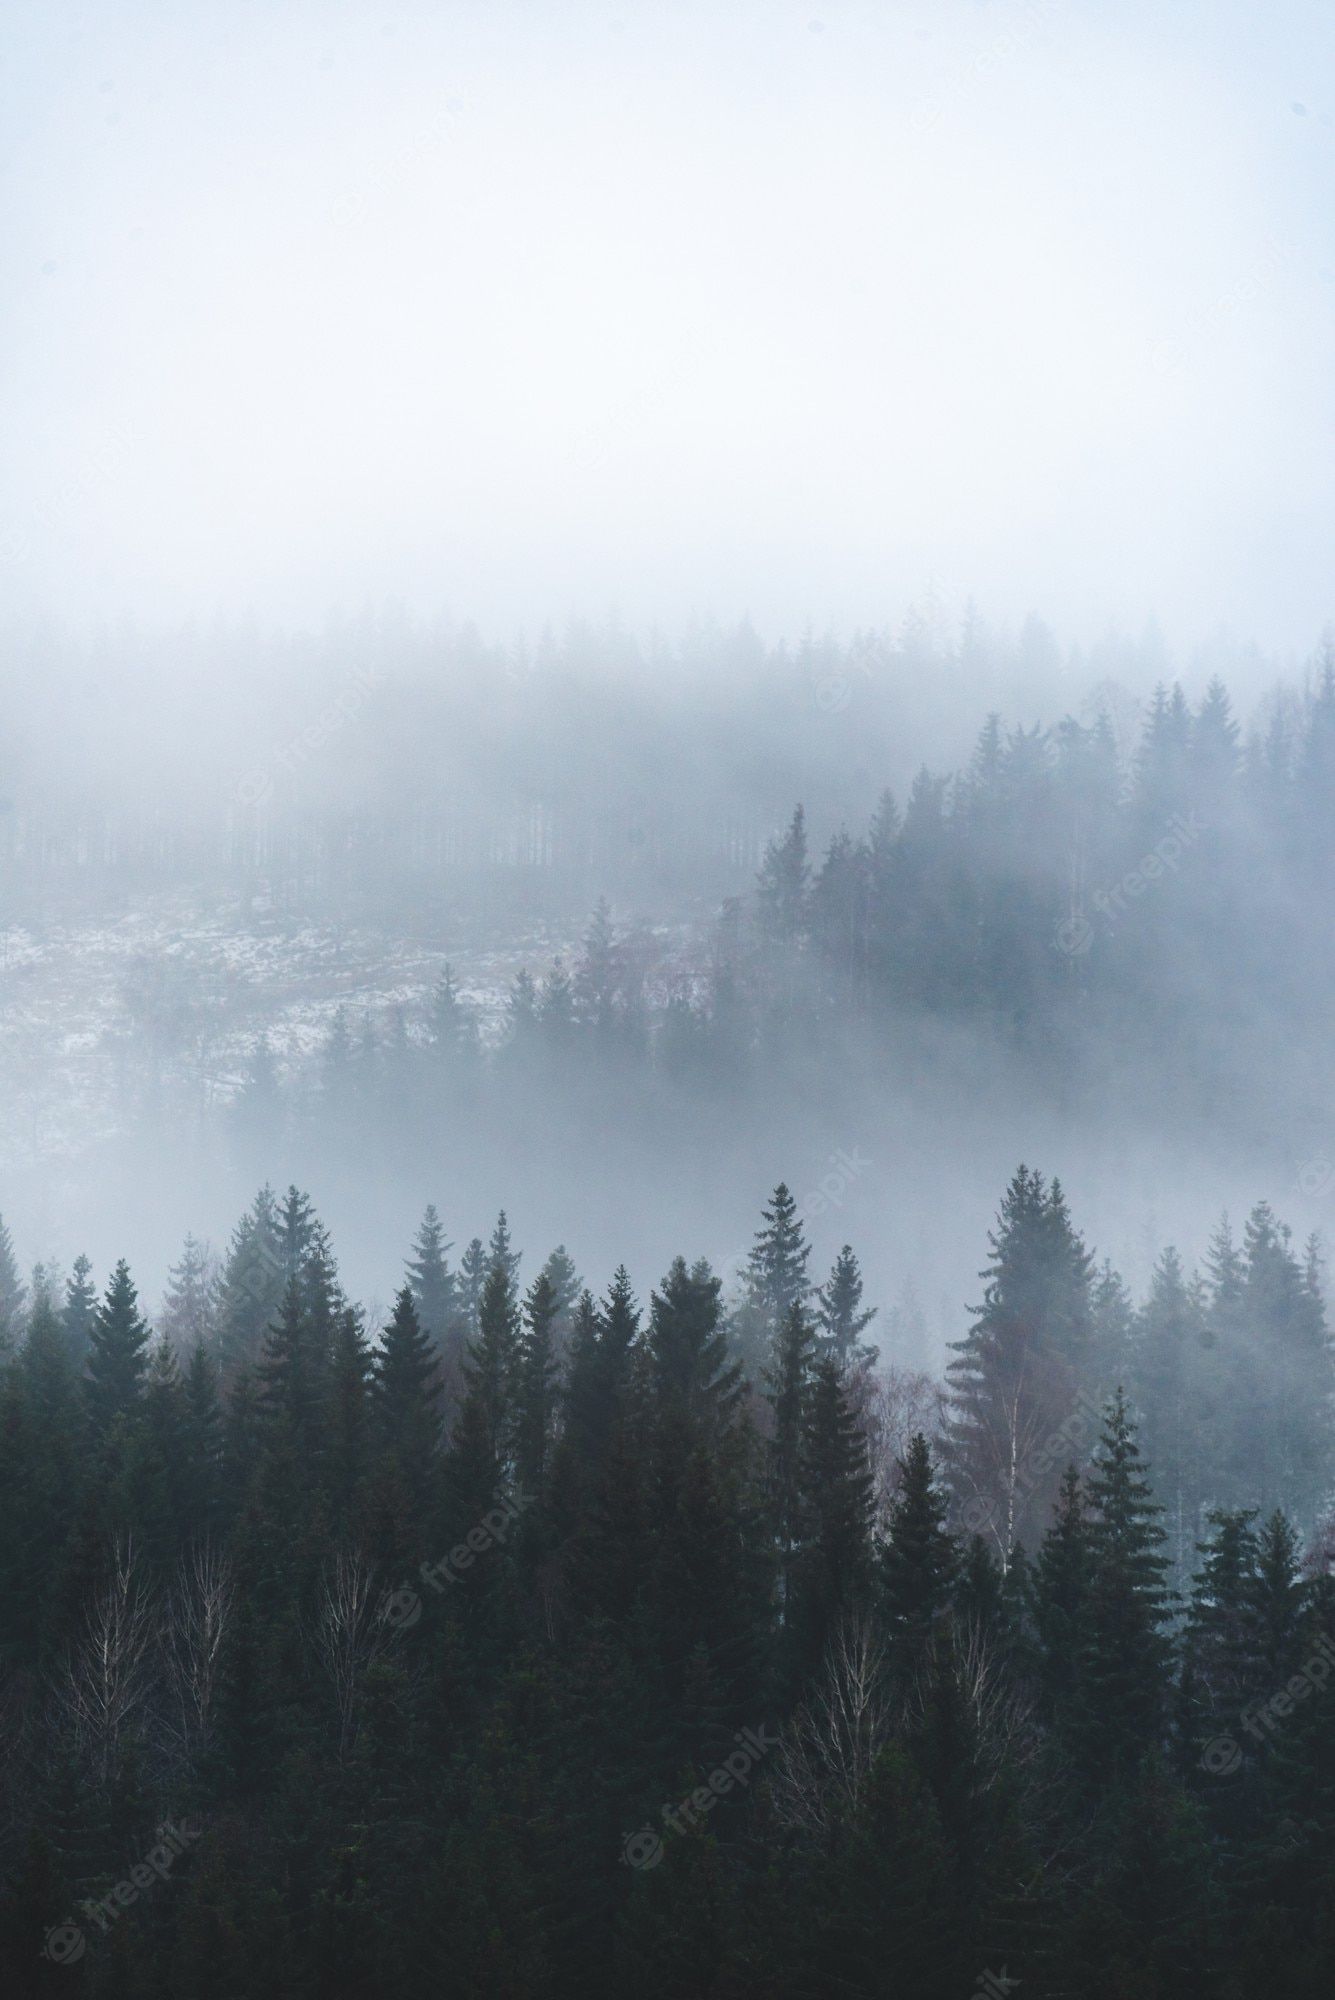 A foggy forest in the mountains. - Fog, foggy forest